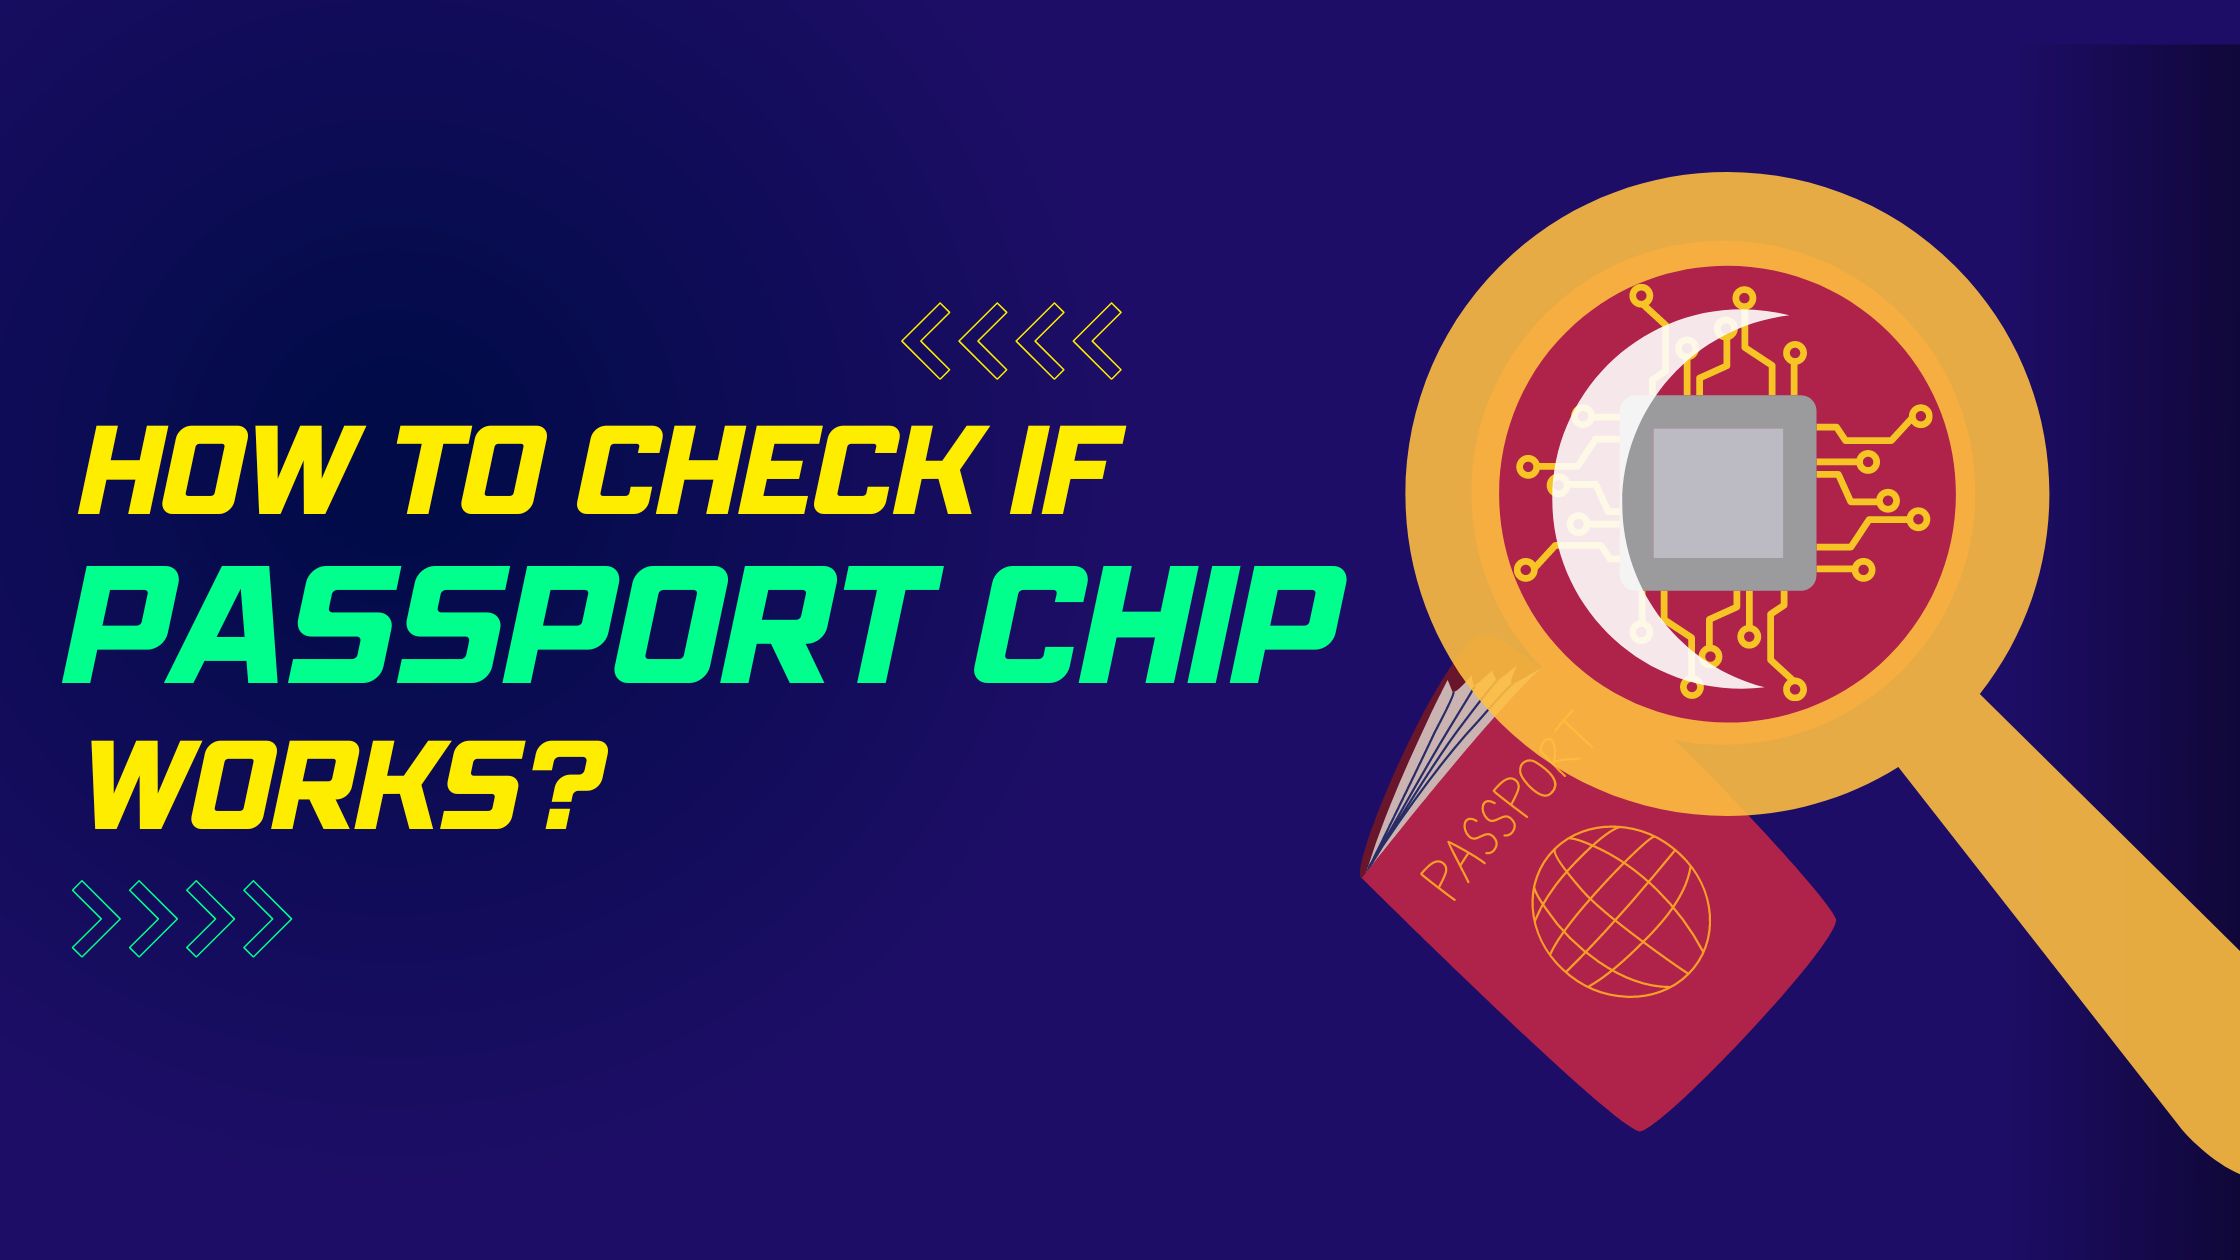 How To Check If Passport Chip Works